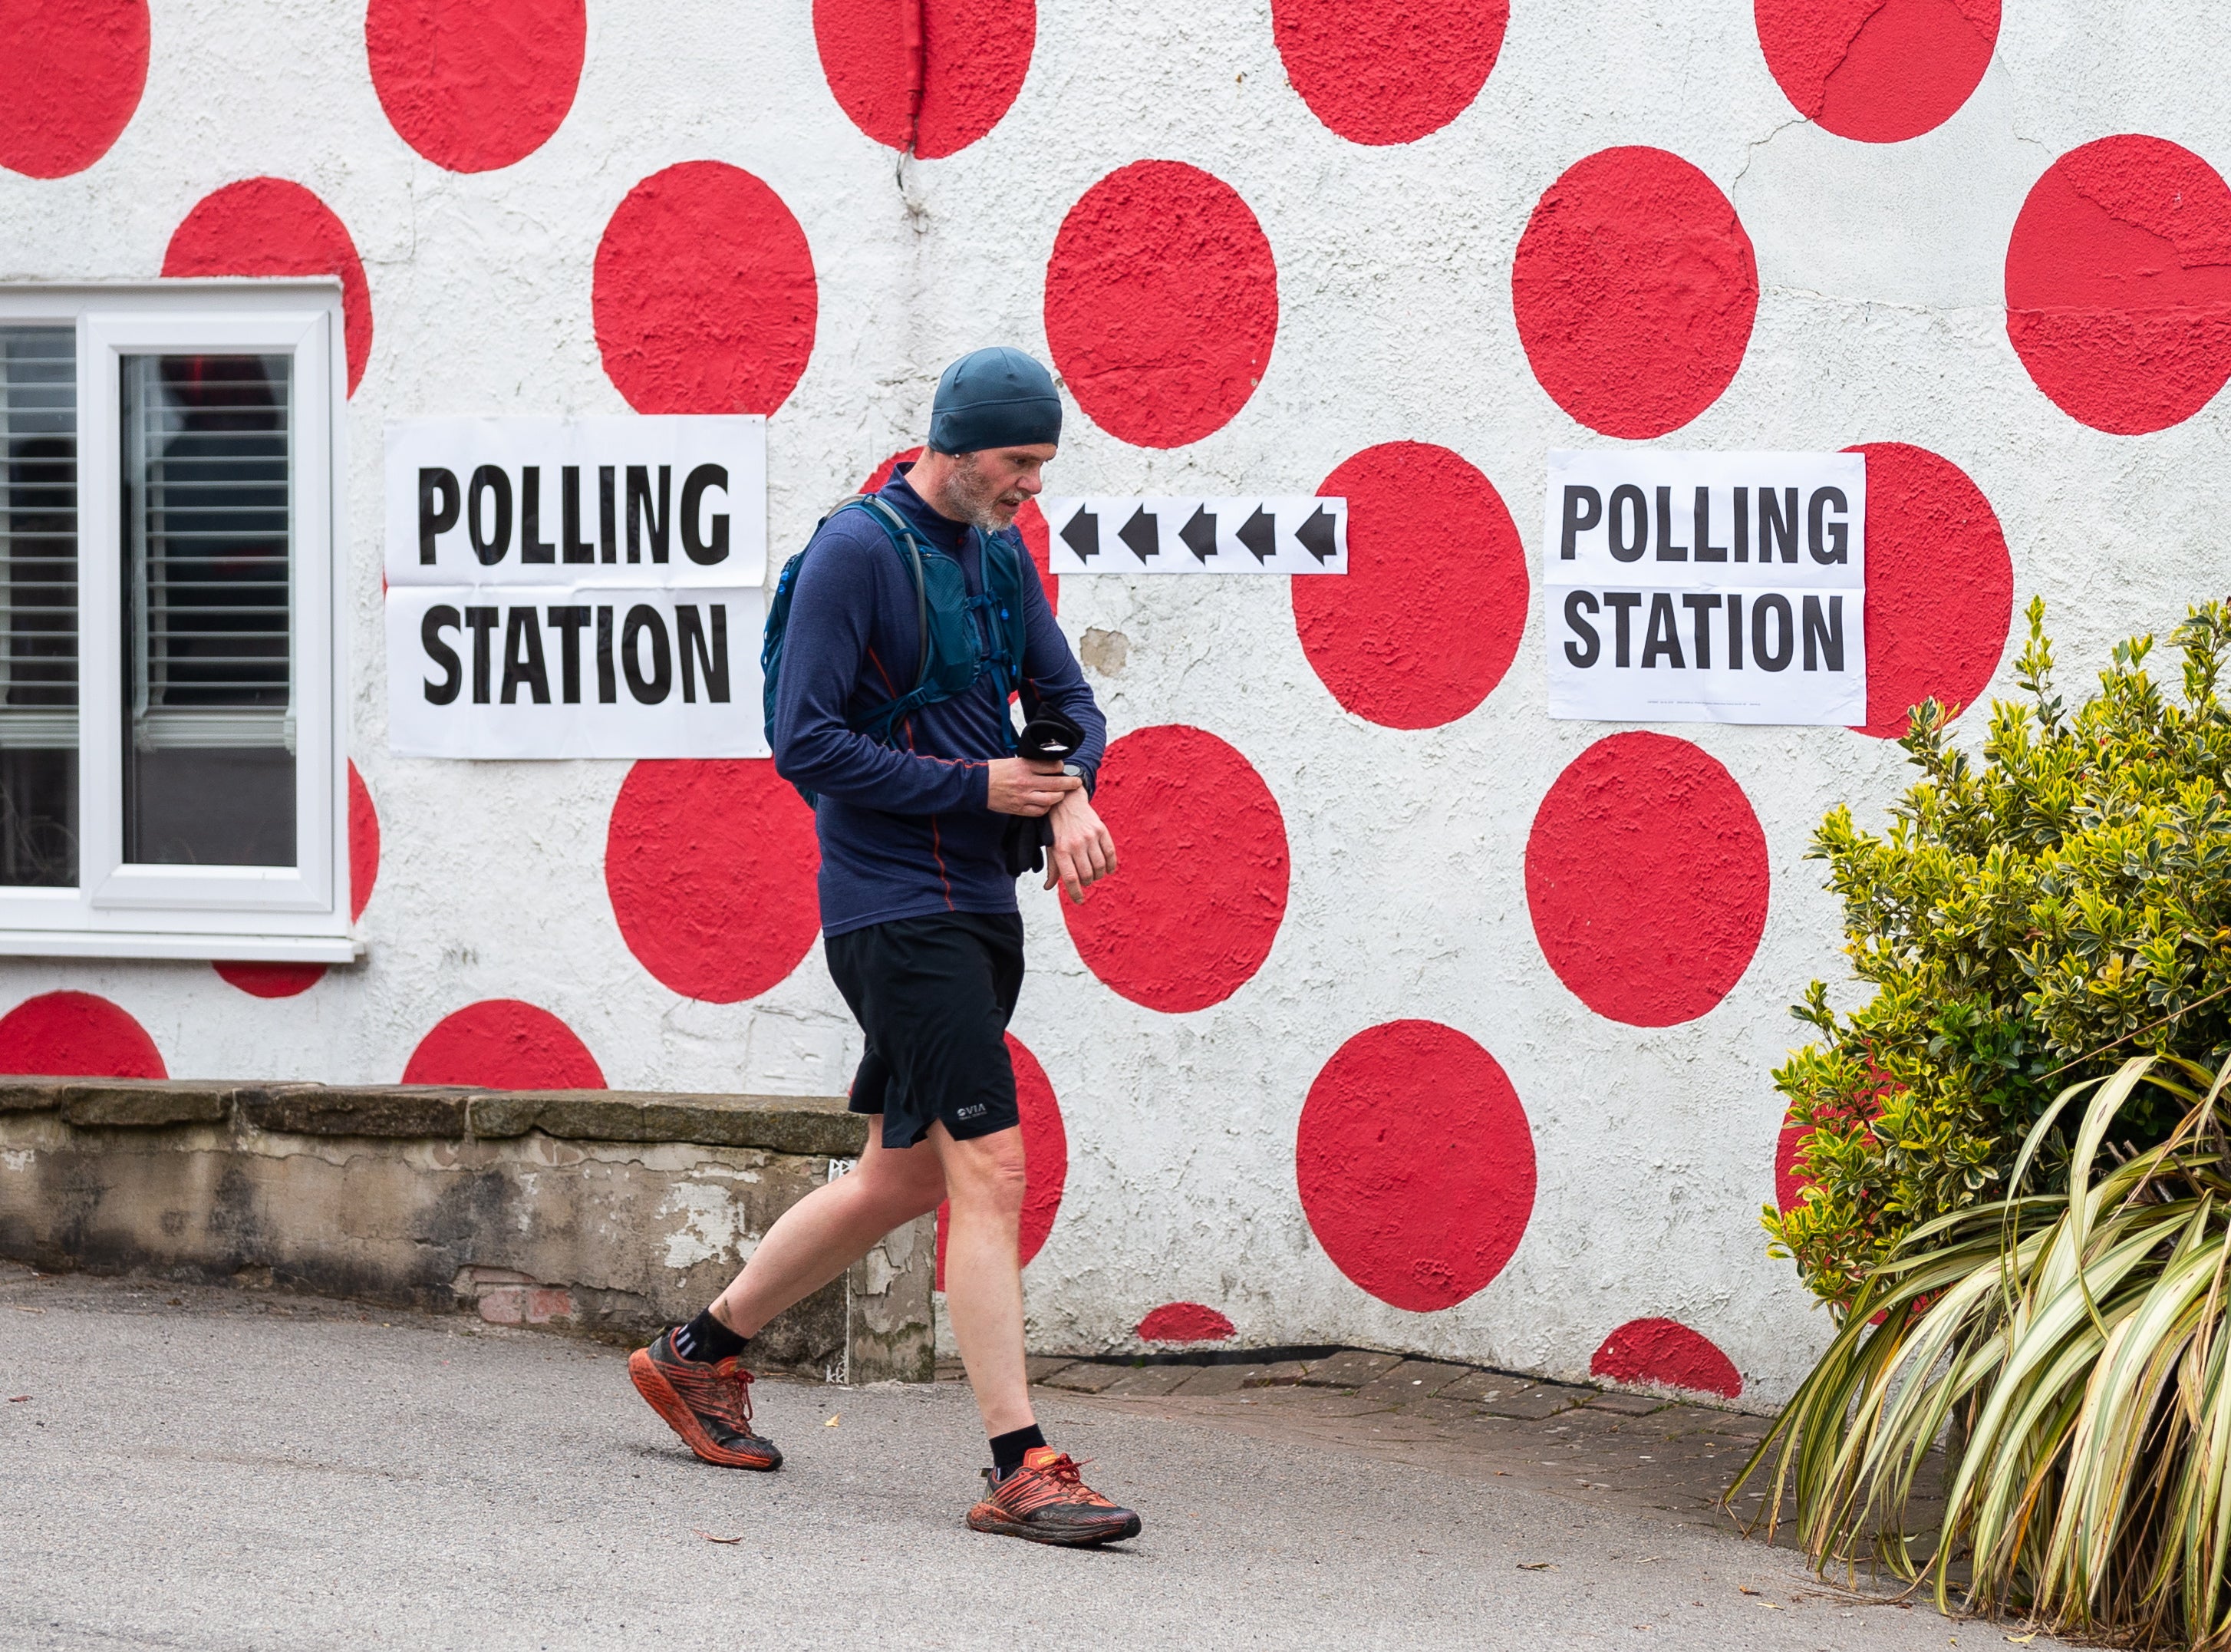 A person walks past a polling station at Langsett Barn in Sheffield, Britain